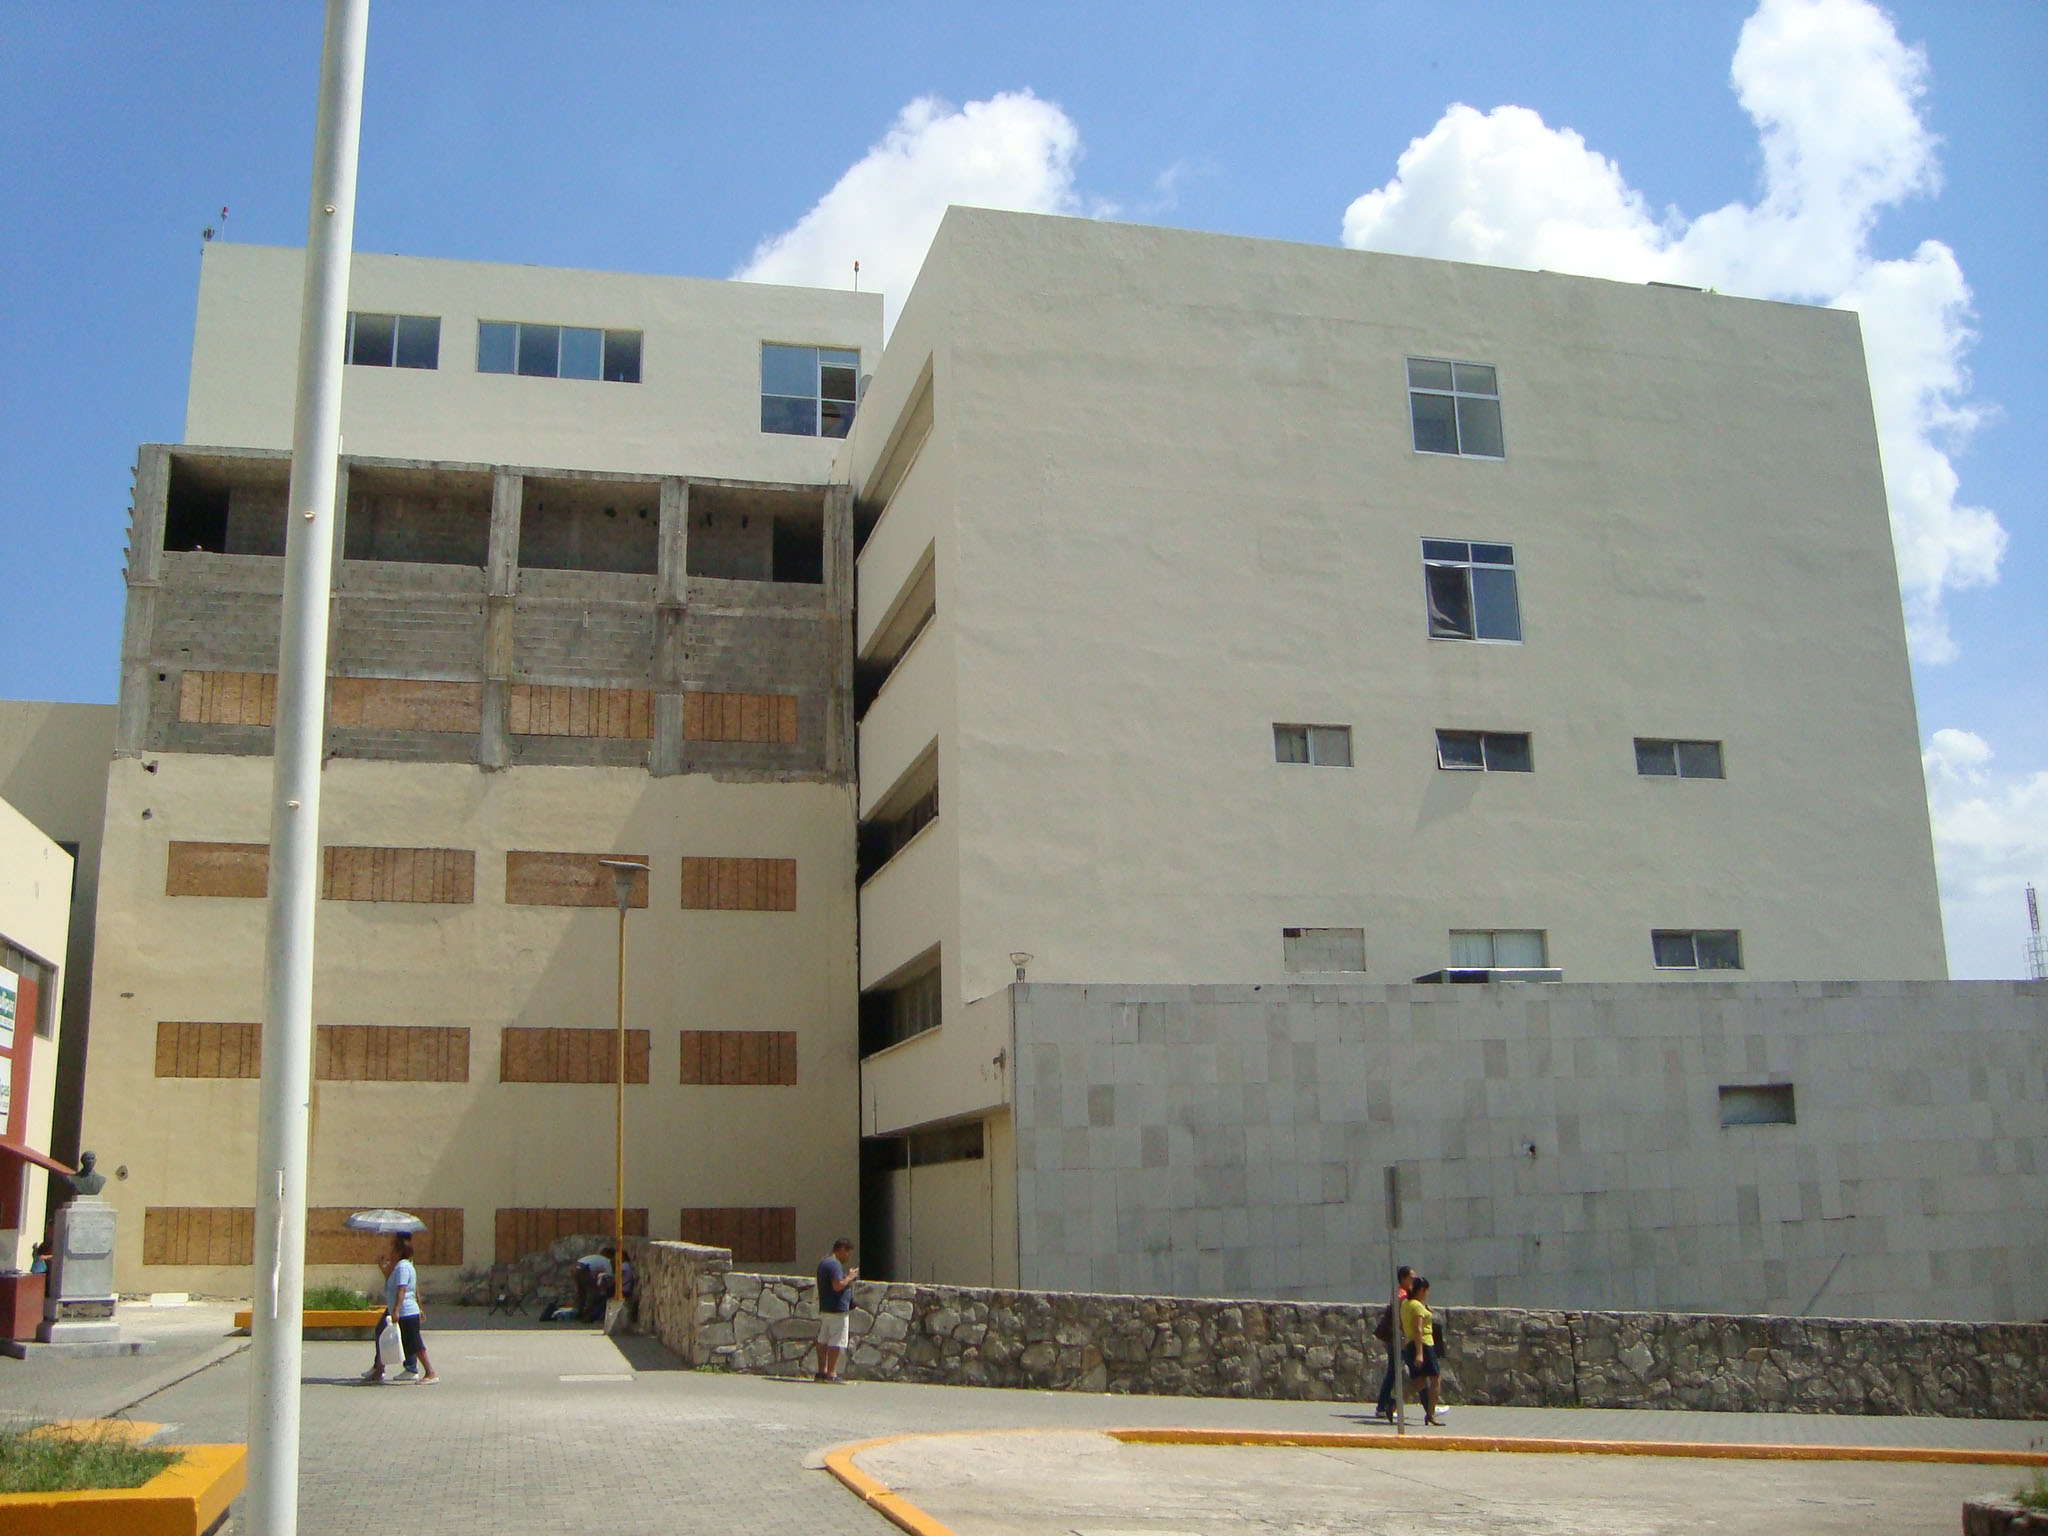 Hospital “Dr. Carlos Canseco”